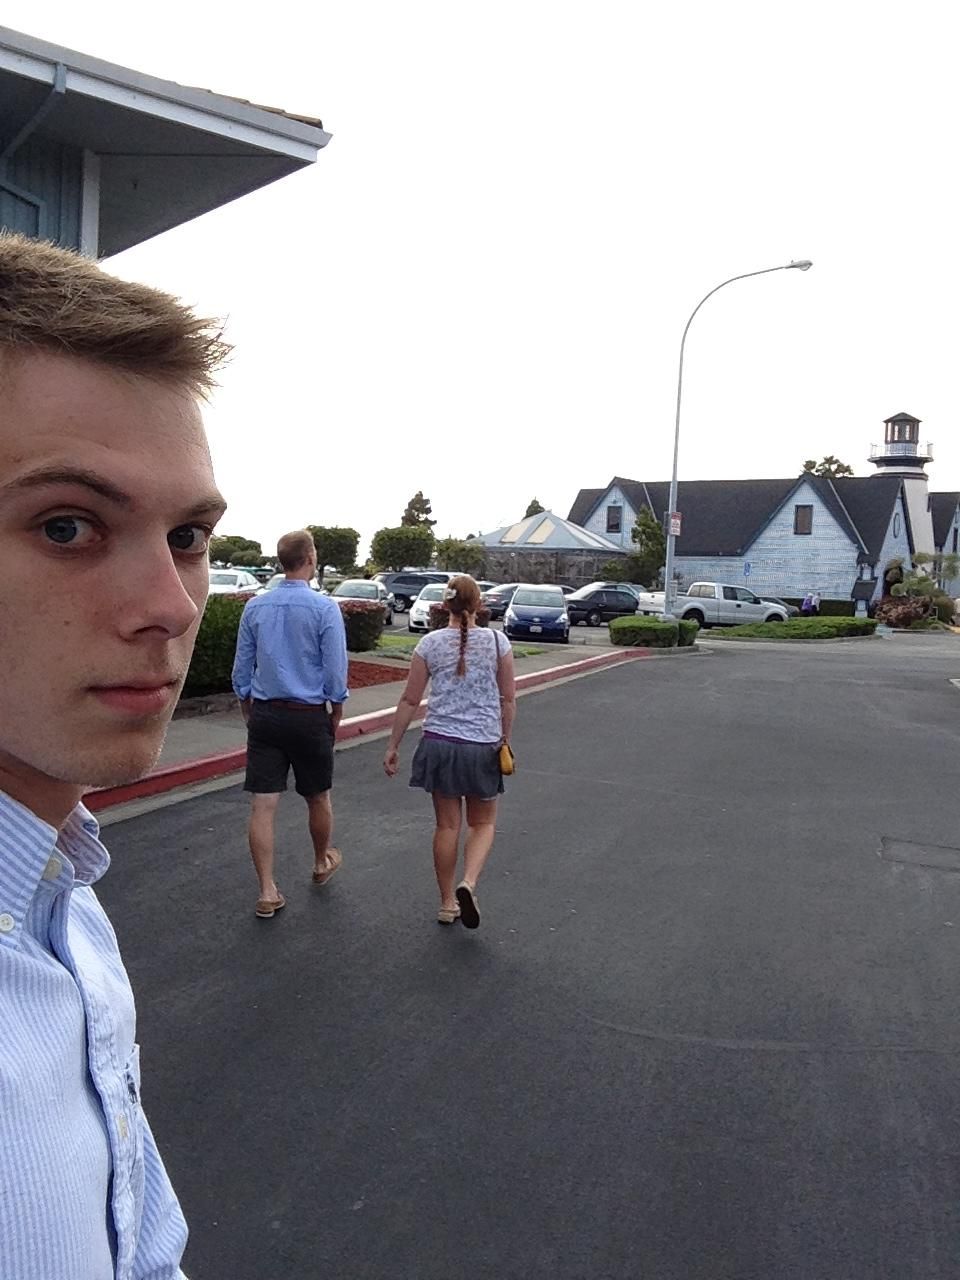 This photo album shows what life is like as a perpetual third wheel